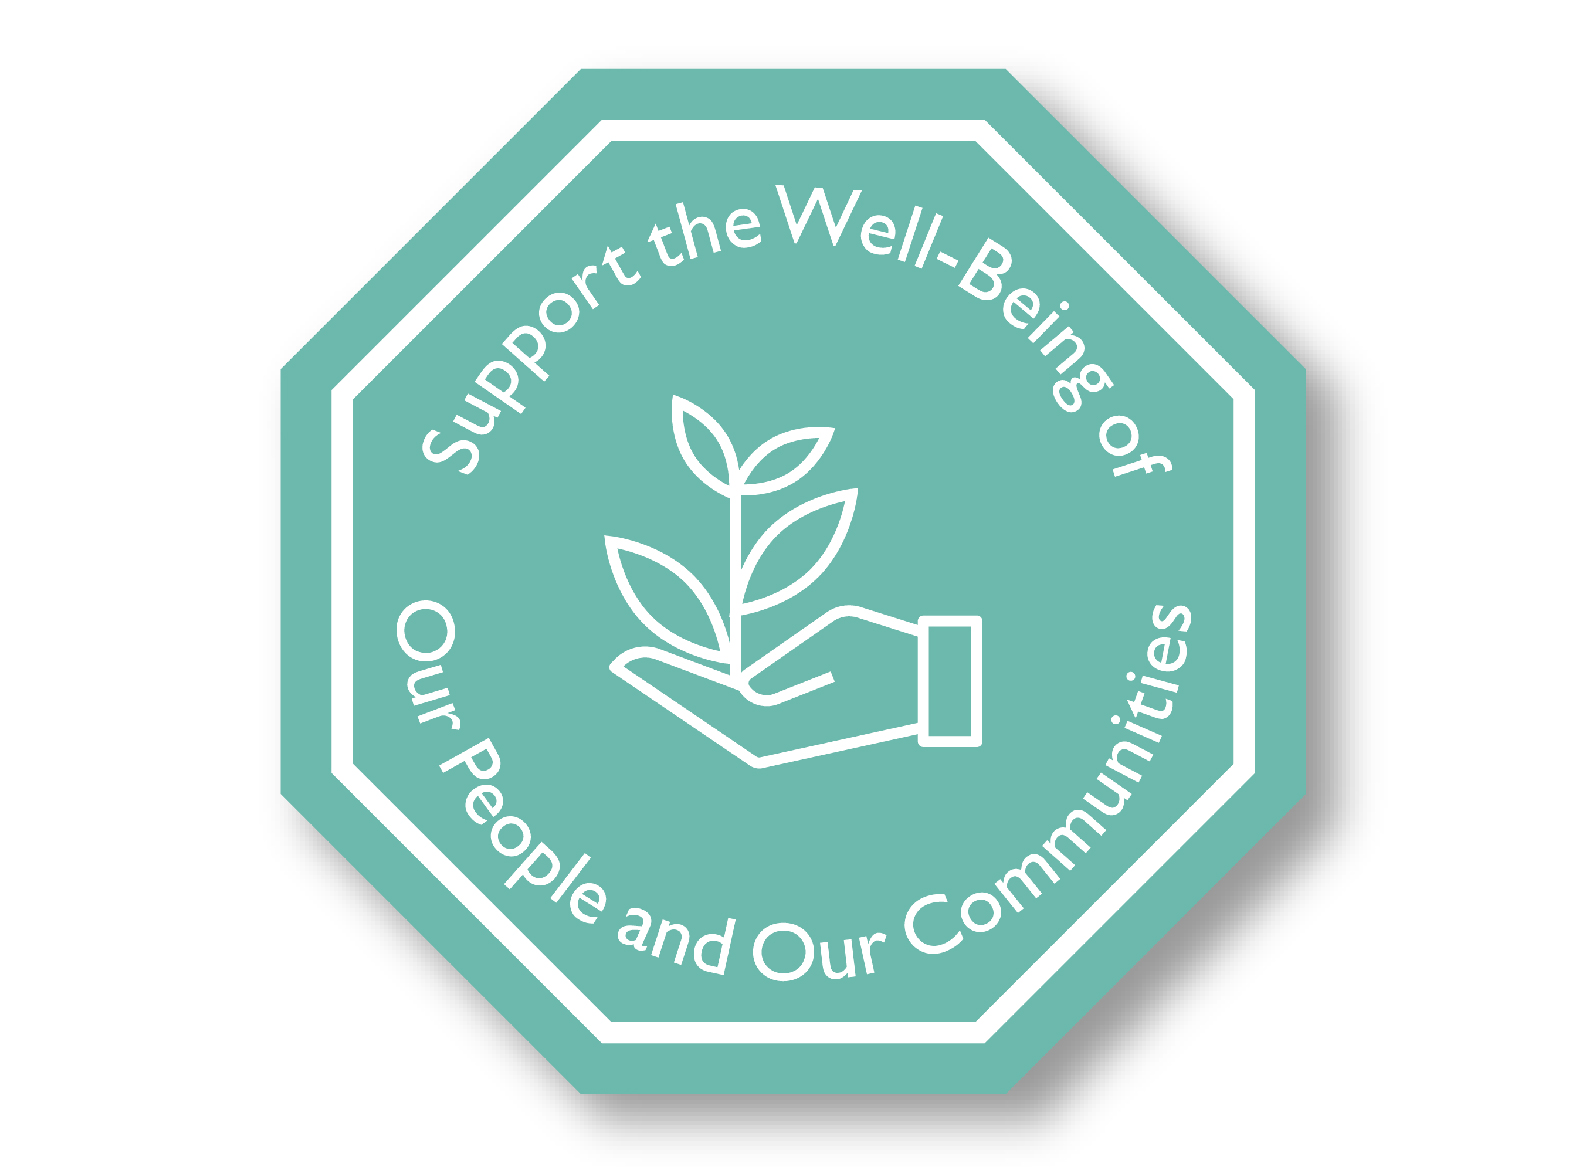 image shows a light green octagon. a sketch in the middle shows an outstretched hand holding a branch with leaves. The words around it say: support the well-being of our people and our communities. 